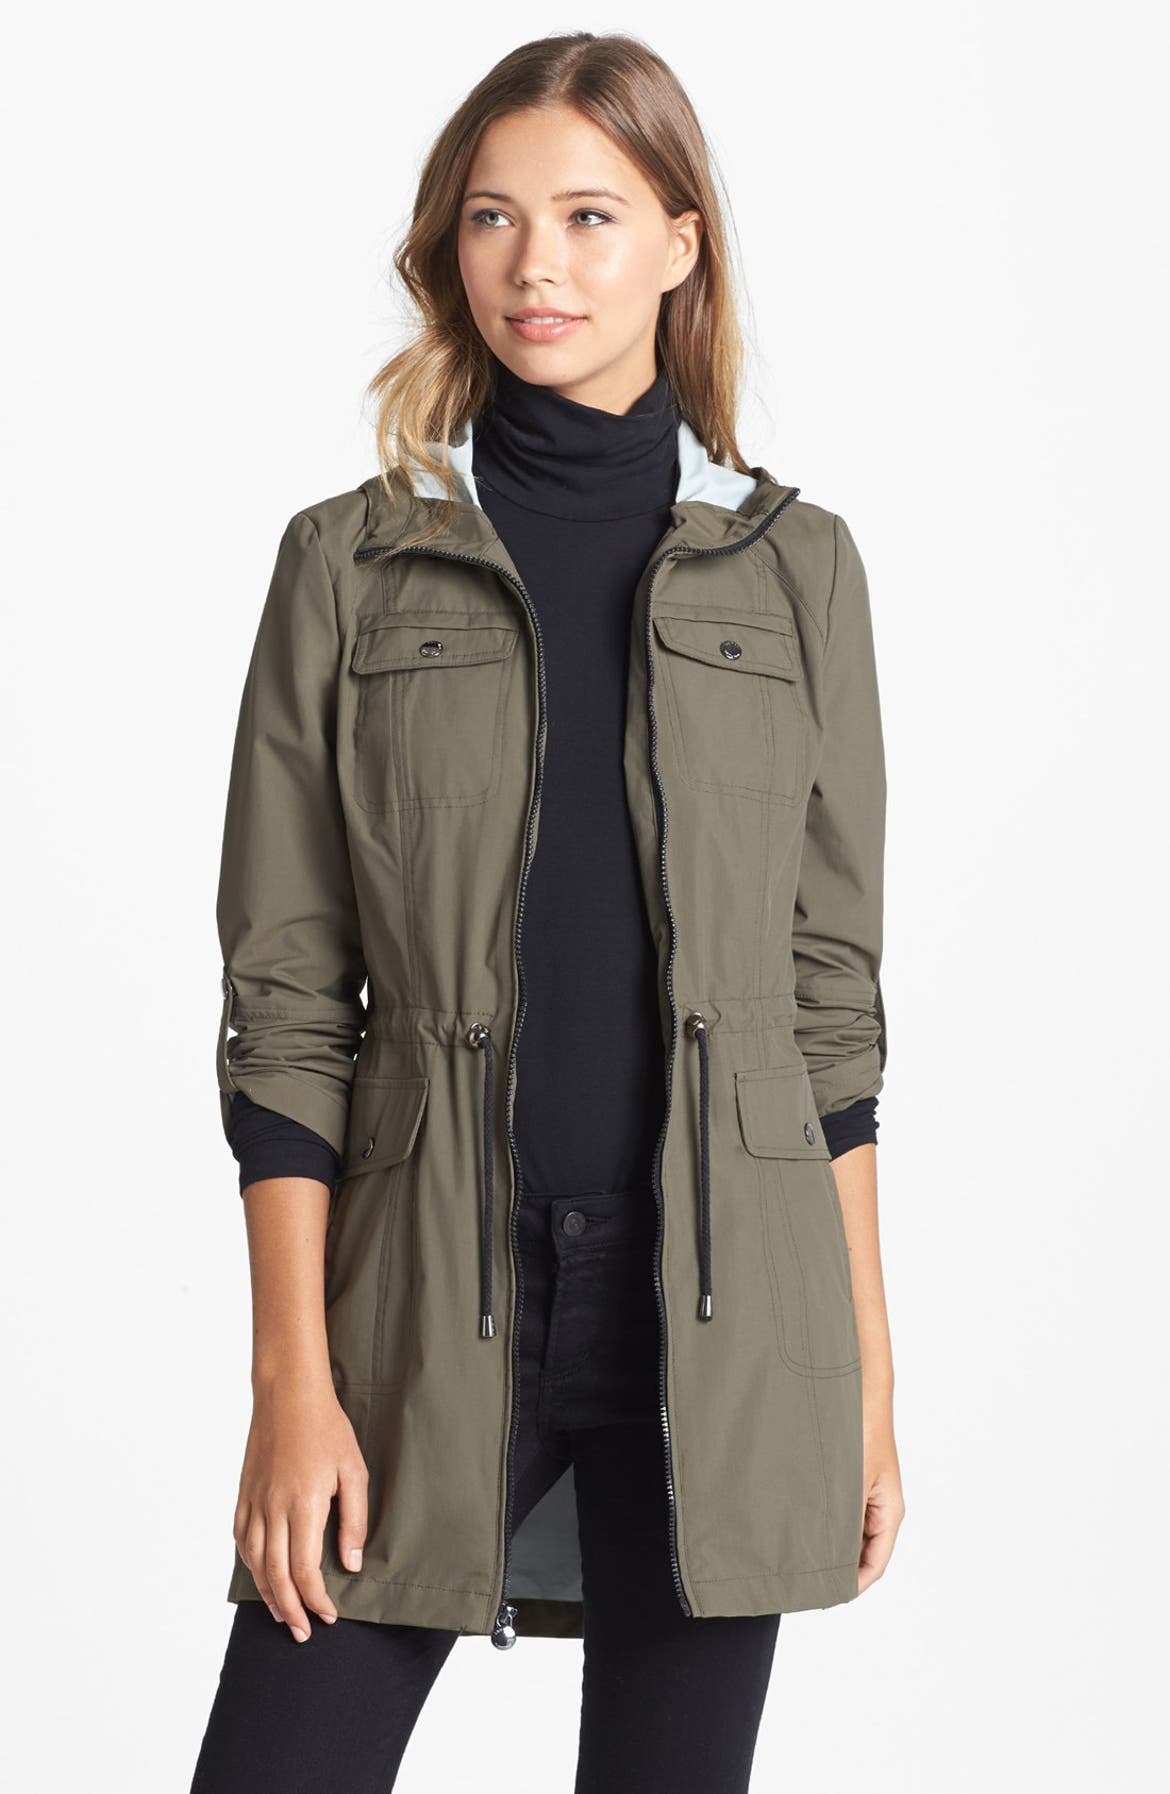 Laundry by Shelli Segal 'Drip Drop' Anorak | Nordstrom